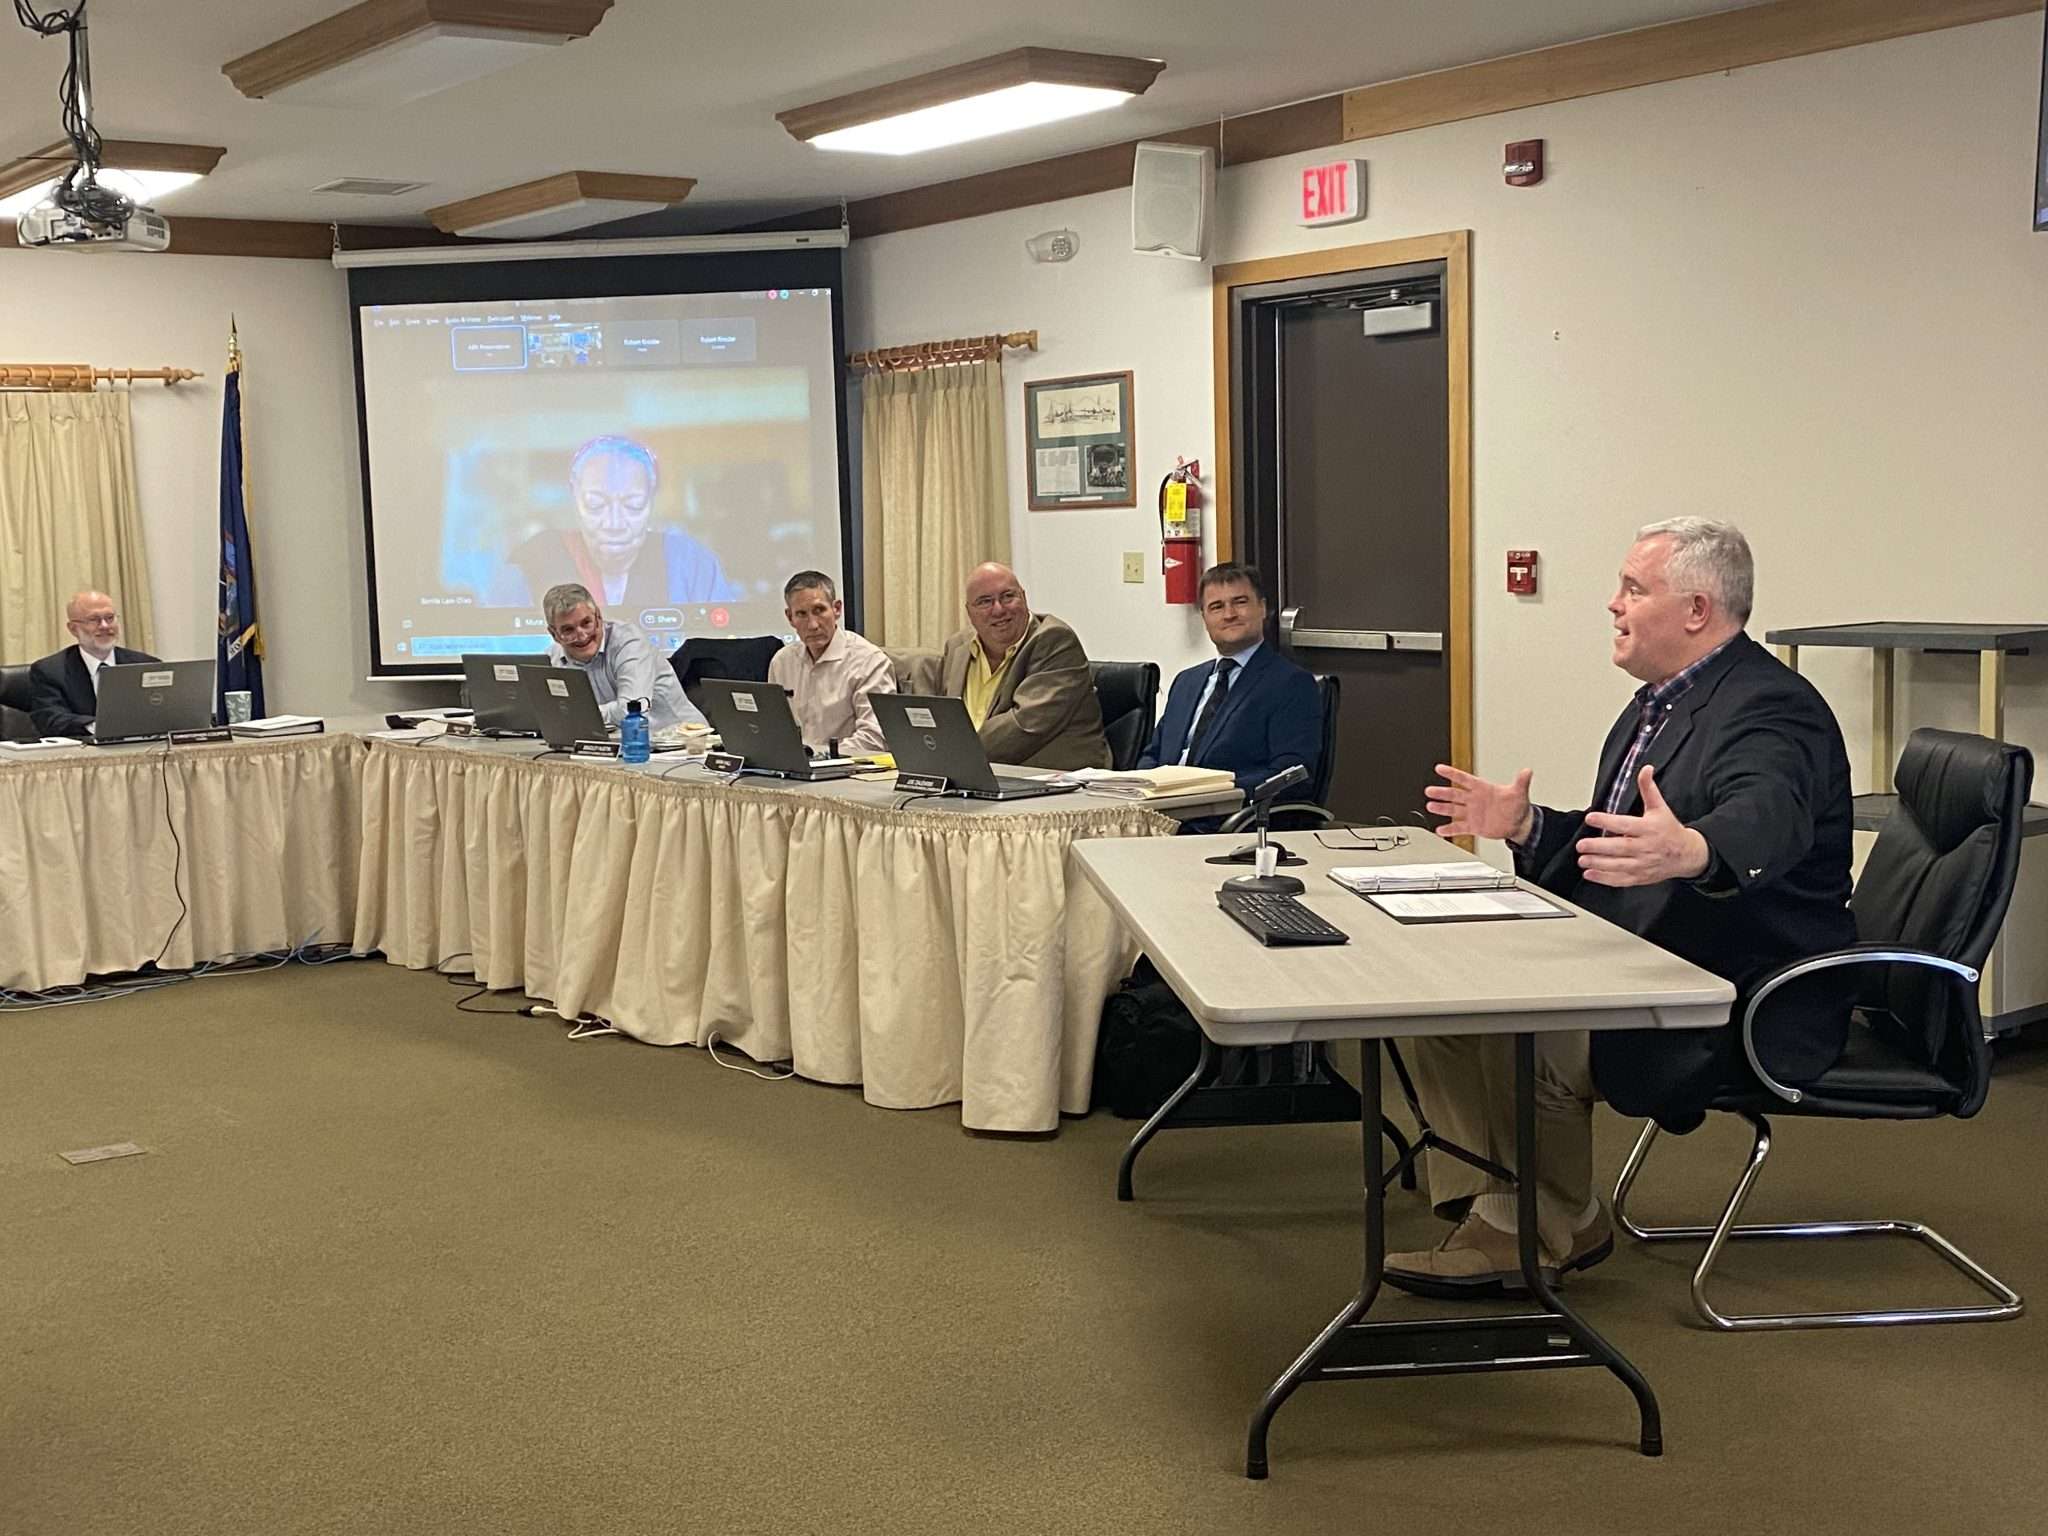 State Sen. Dan Stec, R-Queensbury, discusses cell coverage in the Adirondacks on May 11, 2023 at the Adirondack Park Agency's meeting in Ray Brook.